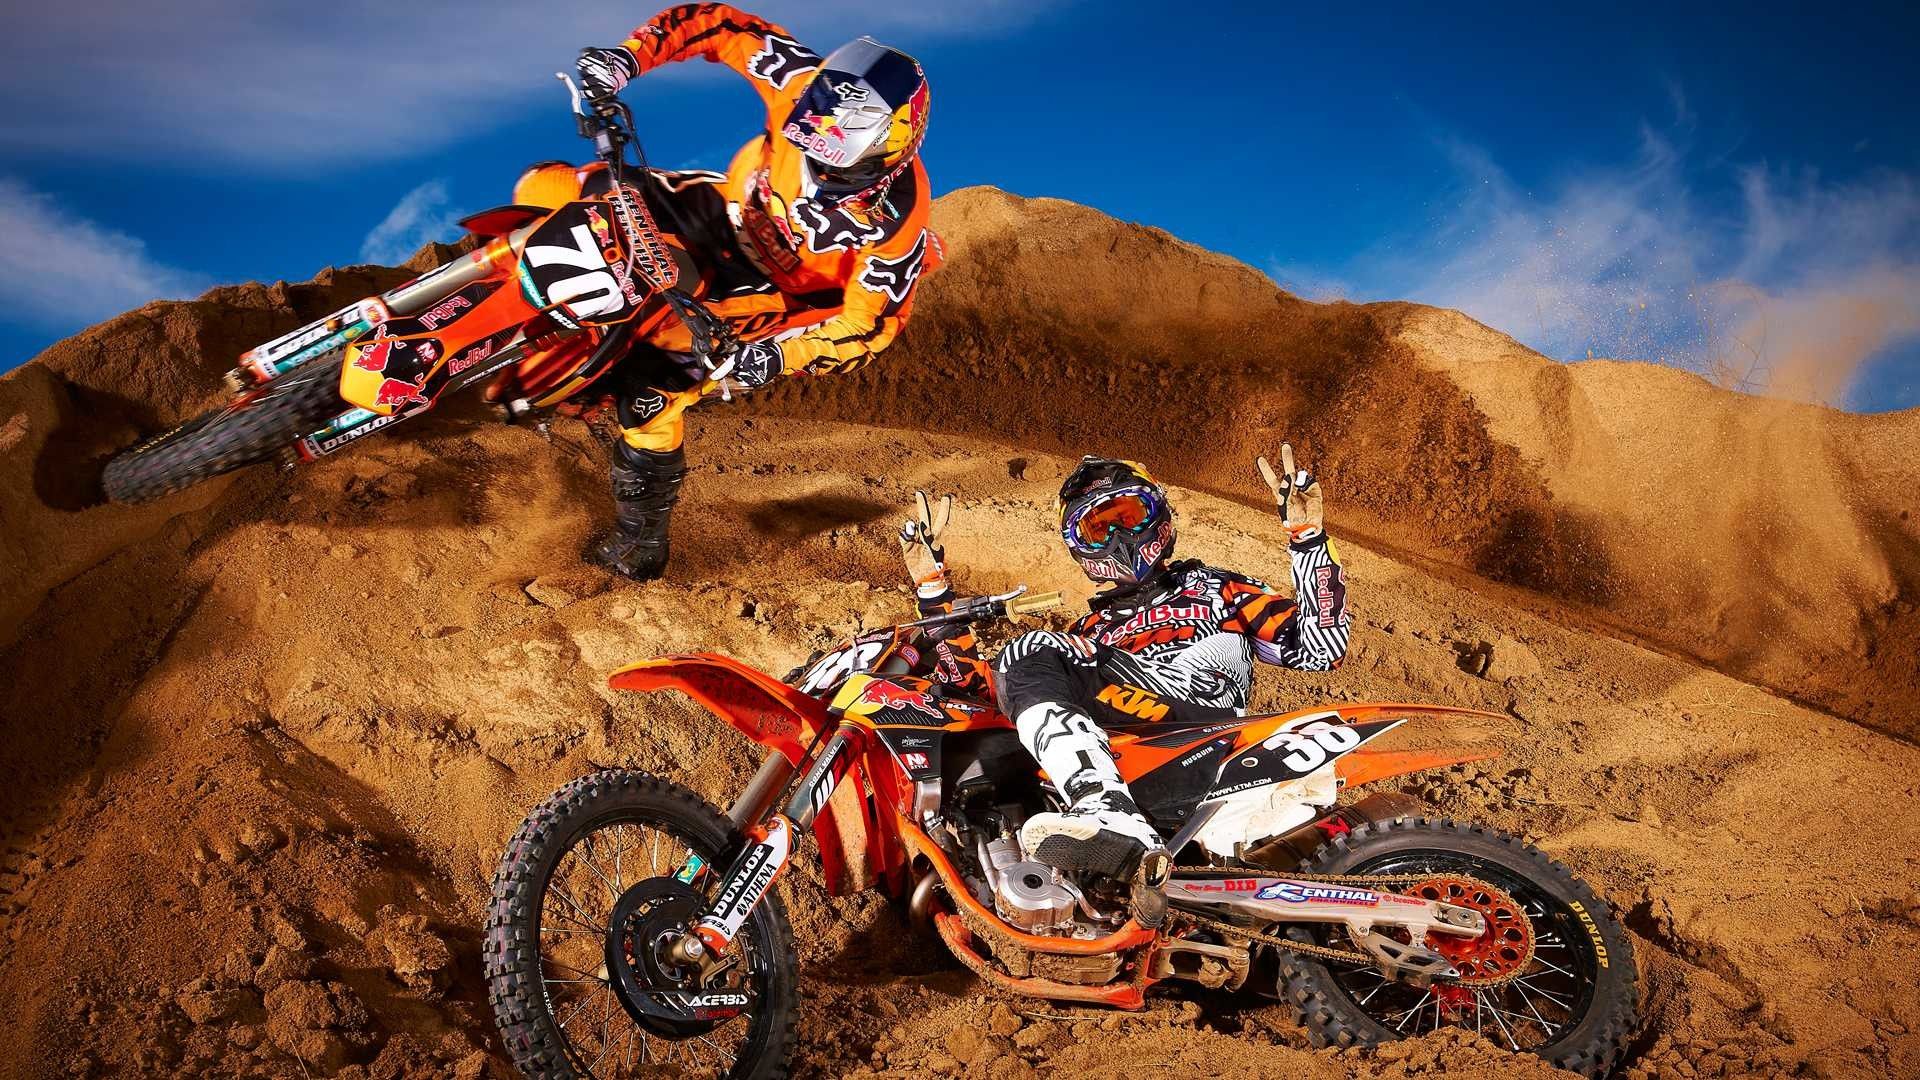 Dirt Bikes Wallpaper background picture